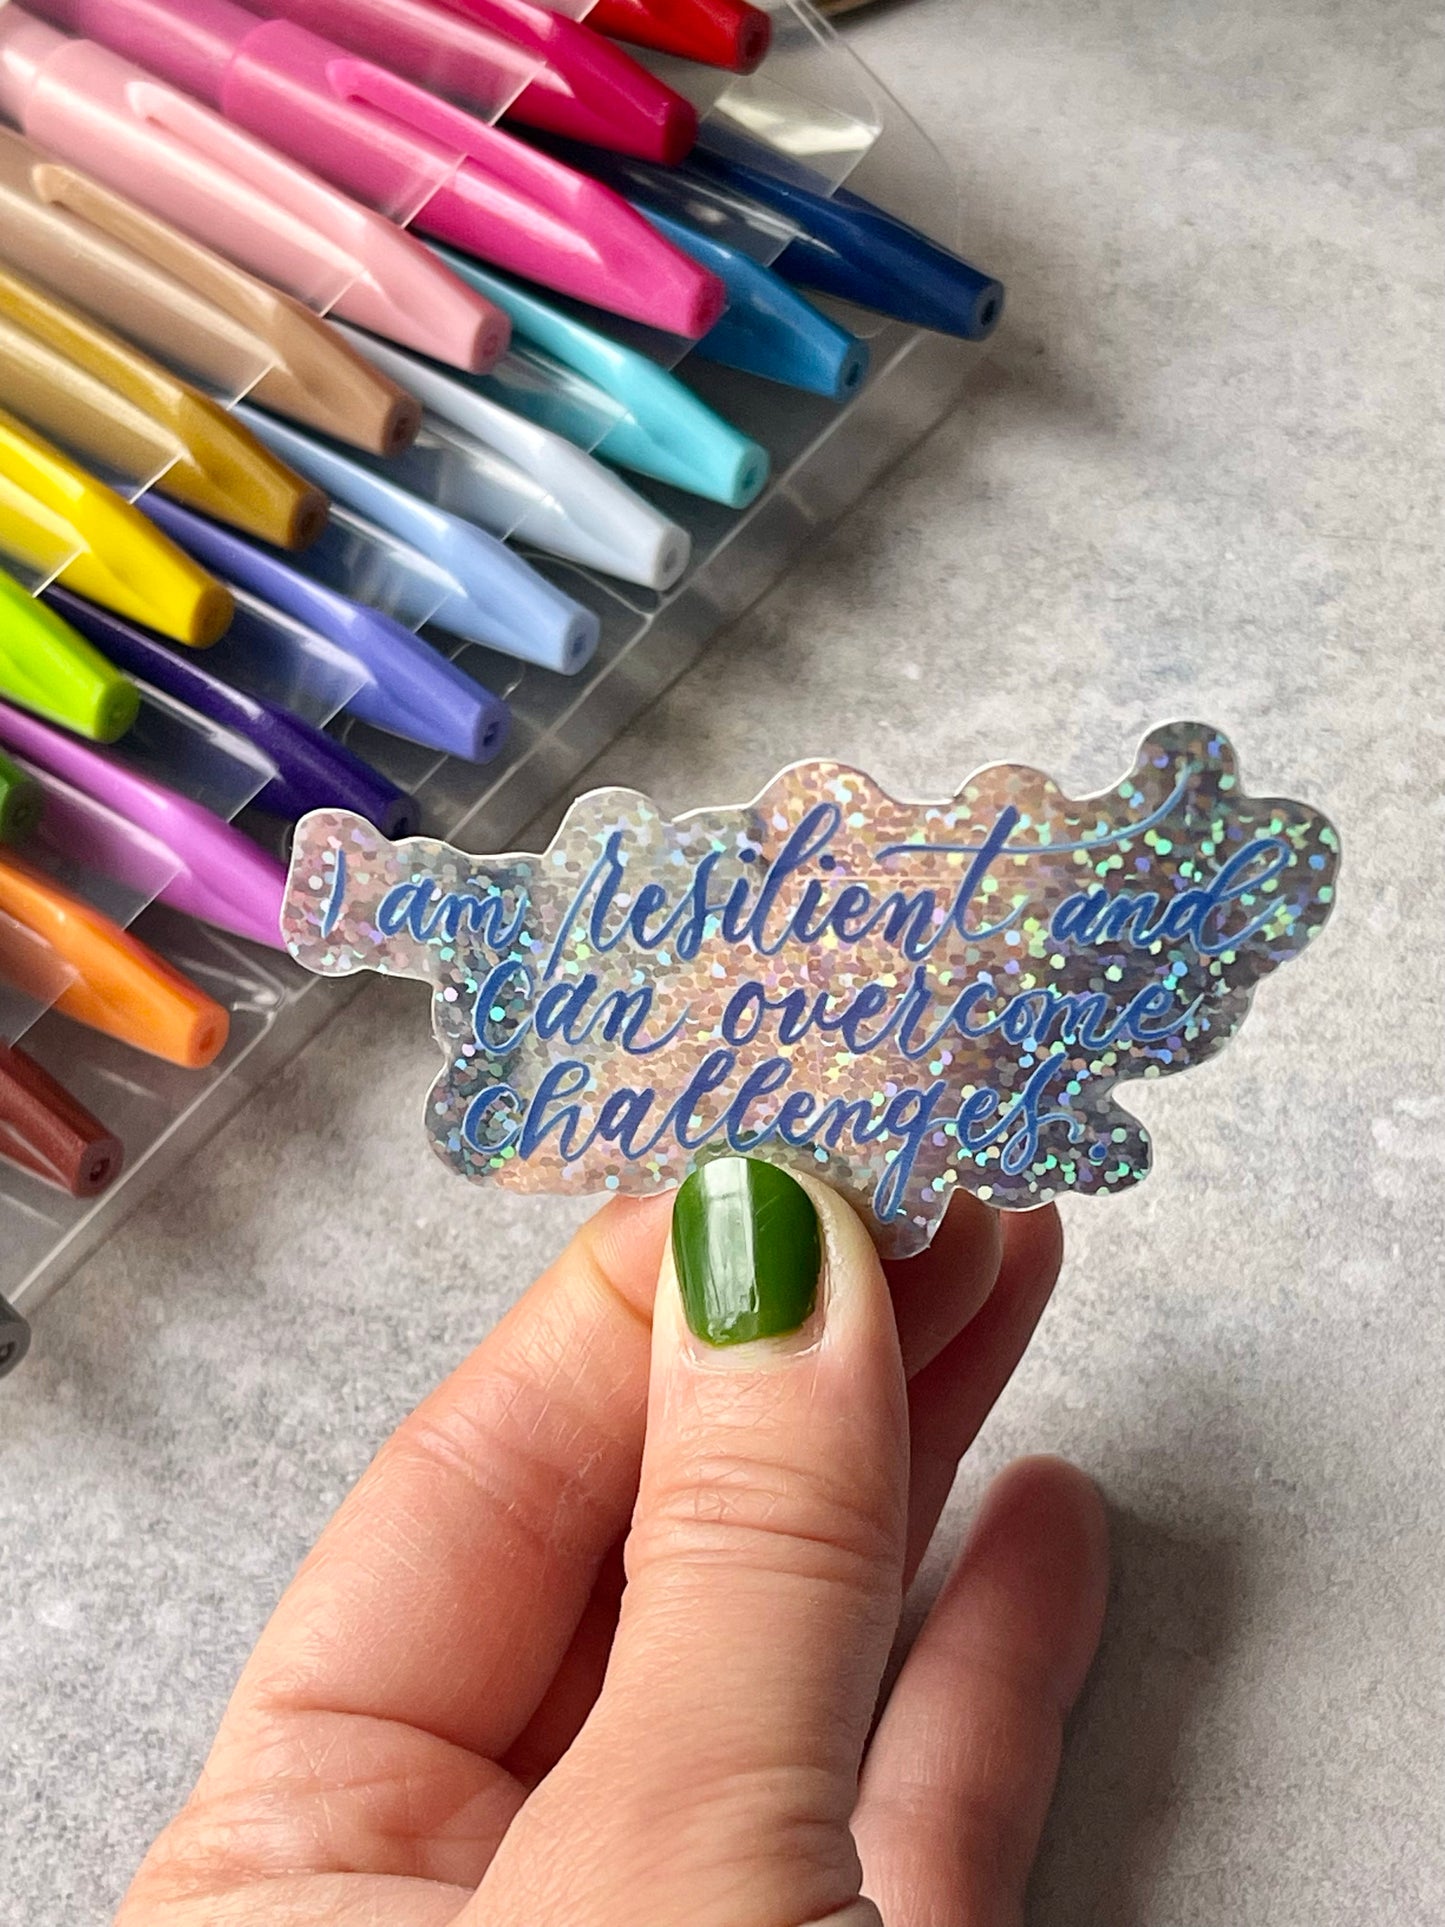 Glitter Sticker "I am resilient..." Calligraphy Quote Vinyl Decal Sticker